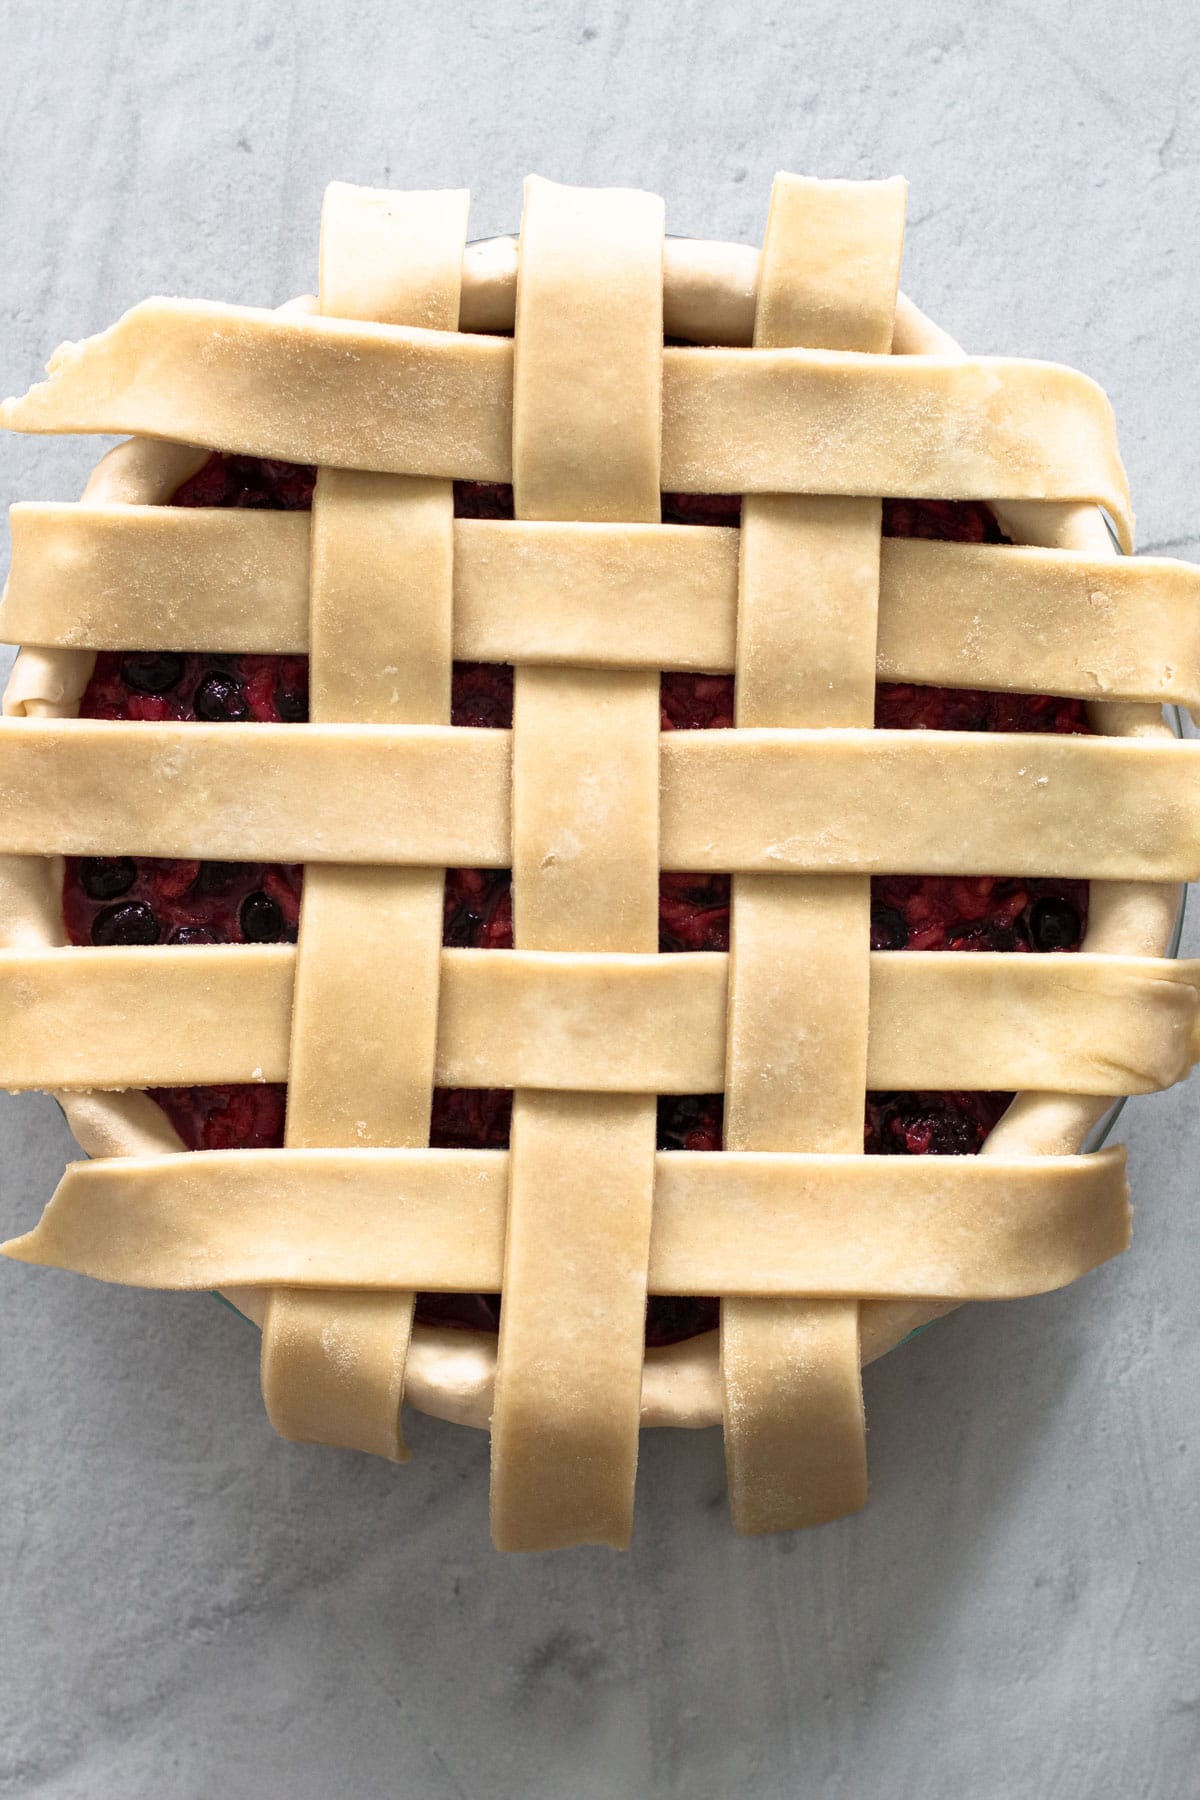 An unbaked pie being topped with a lattice crust.